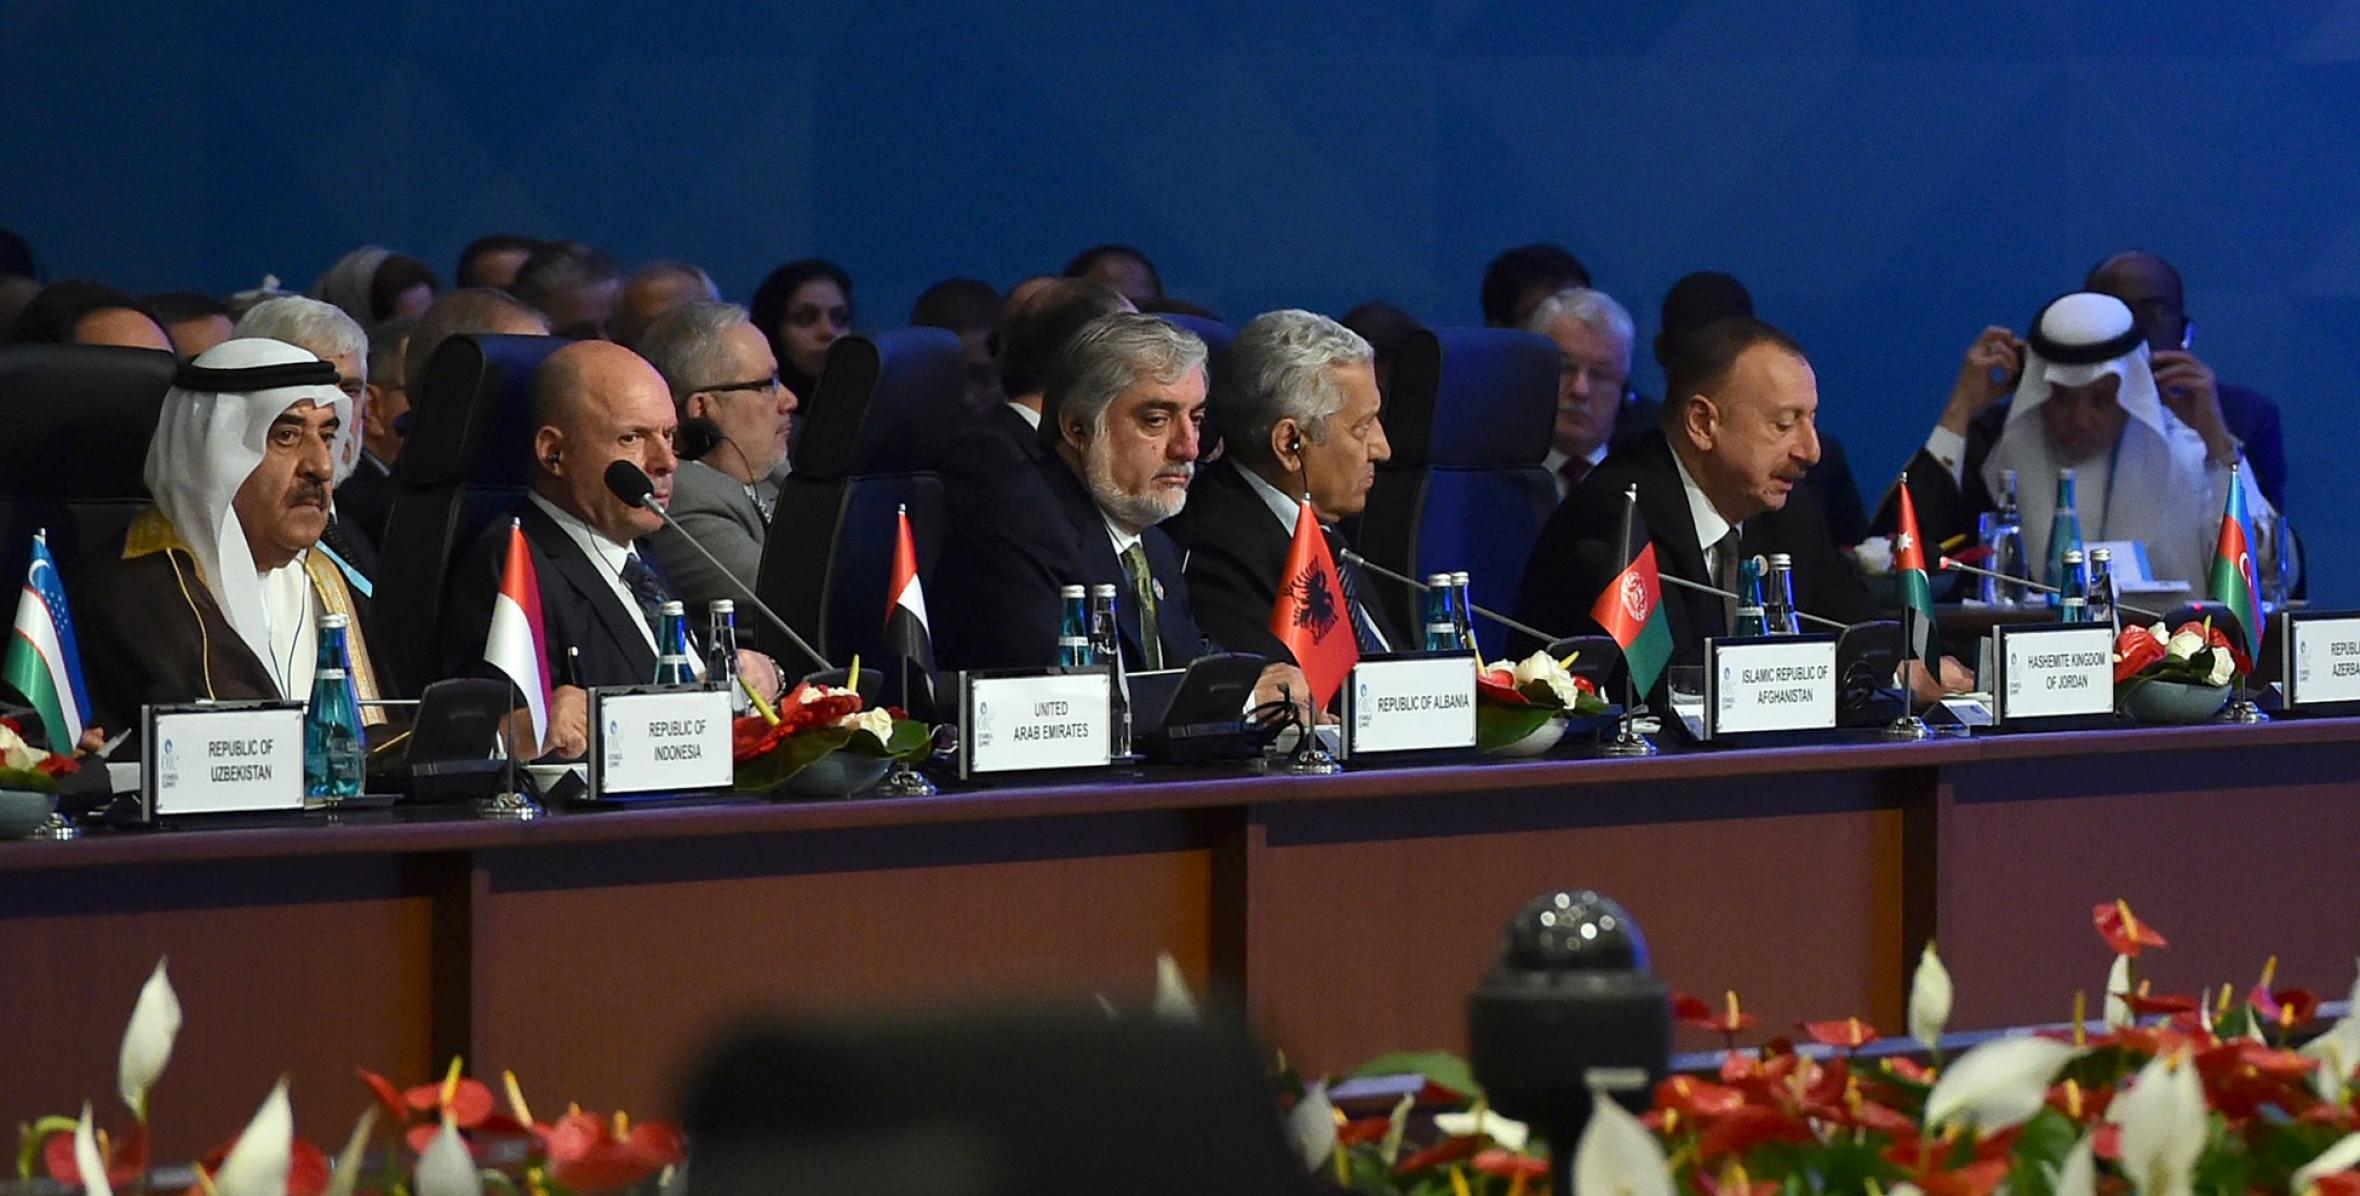 Ilham Aliyev addressed first session of 13th Summit of Organization of Islamic Cooperation in Istanbul